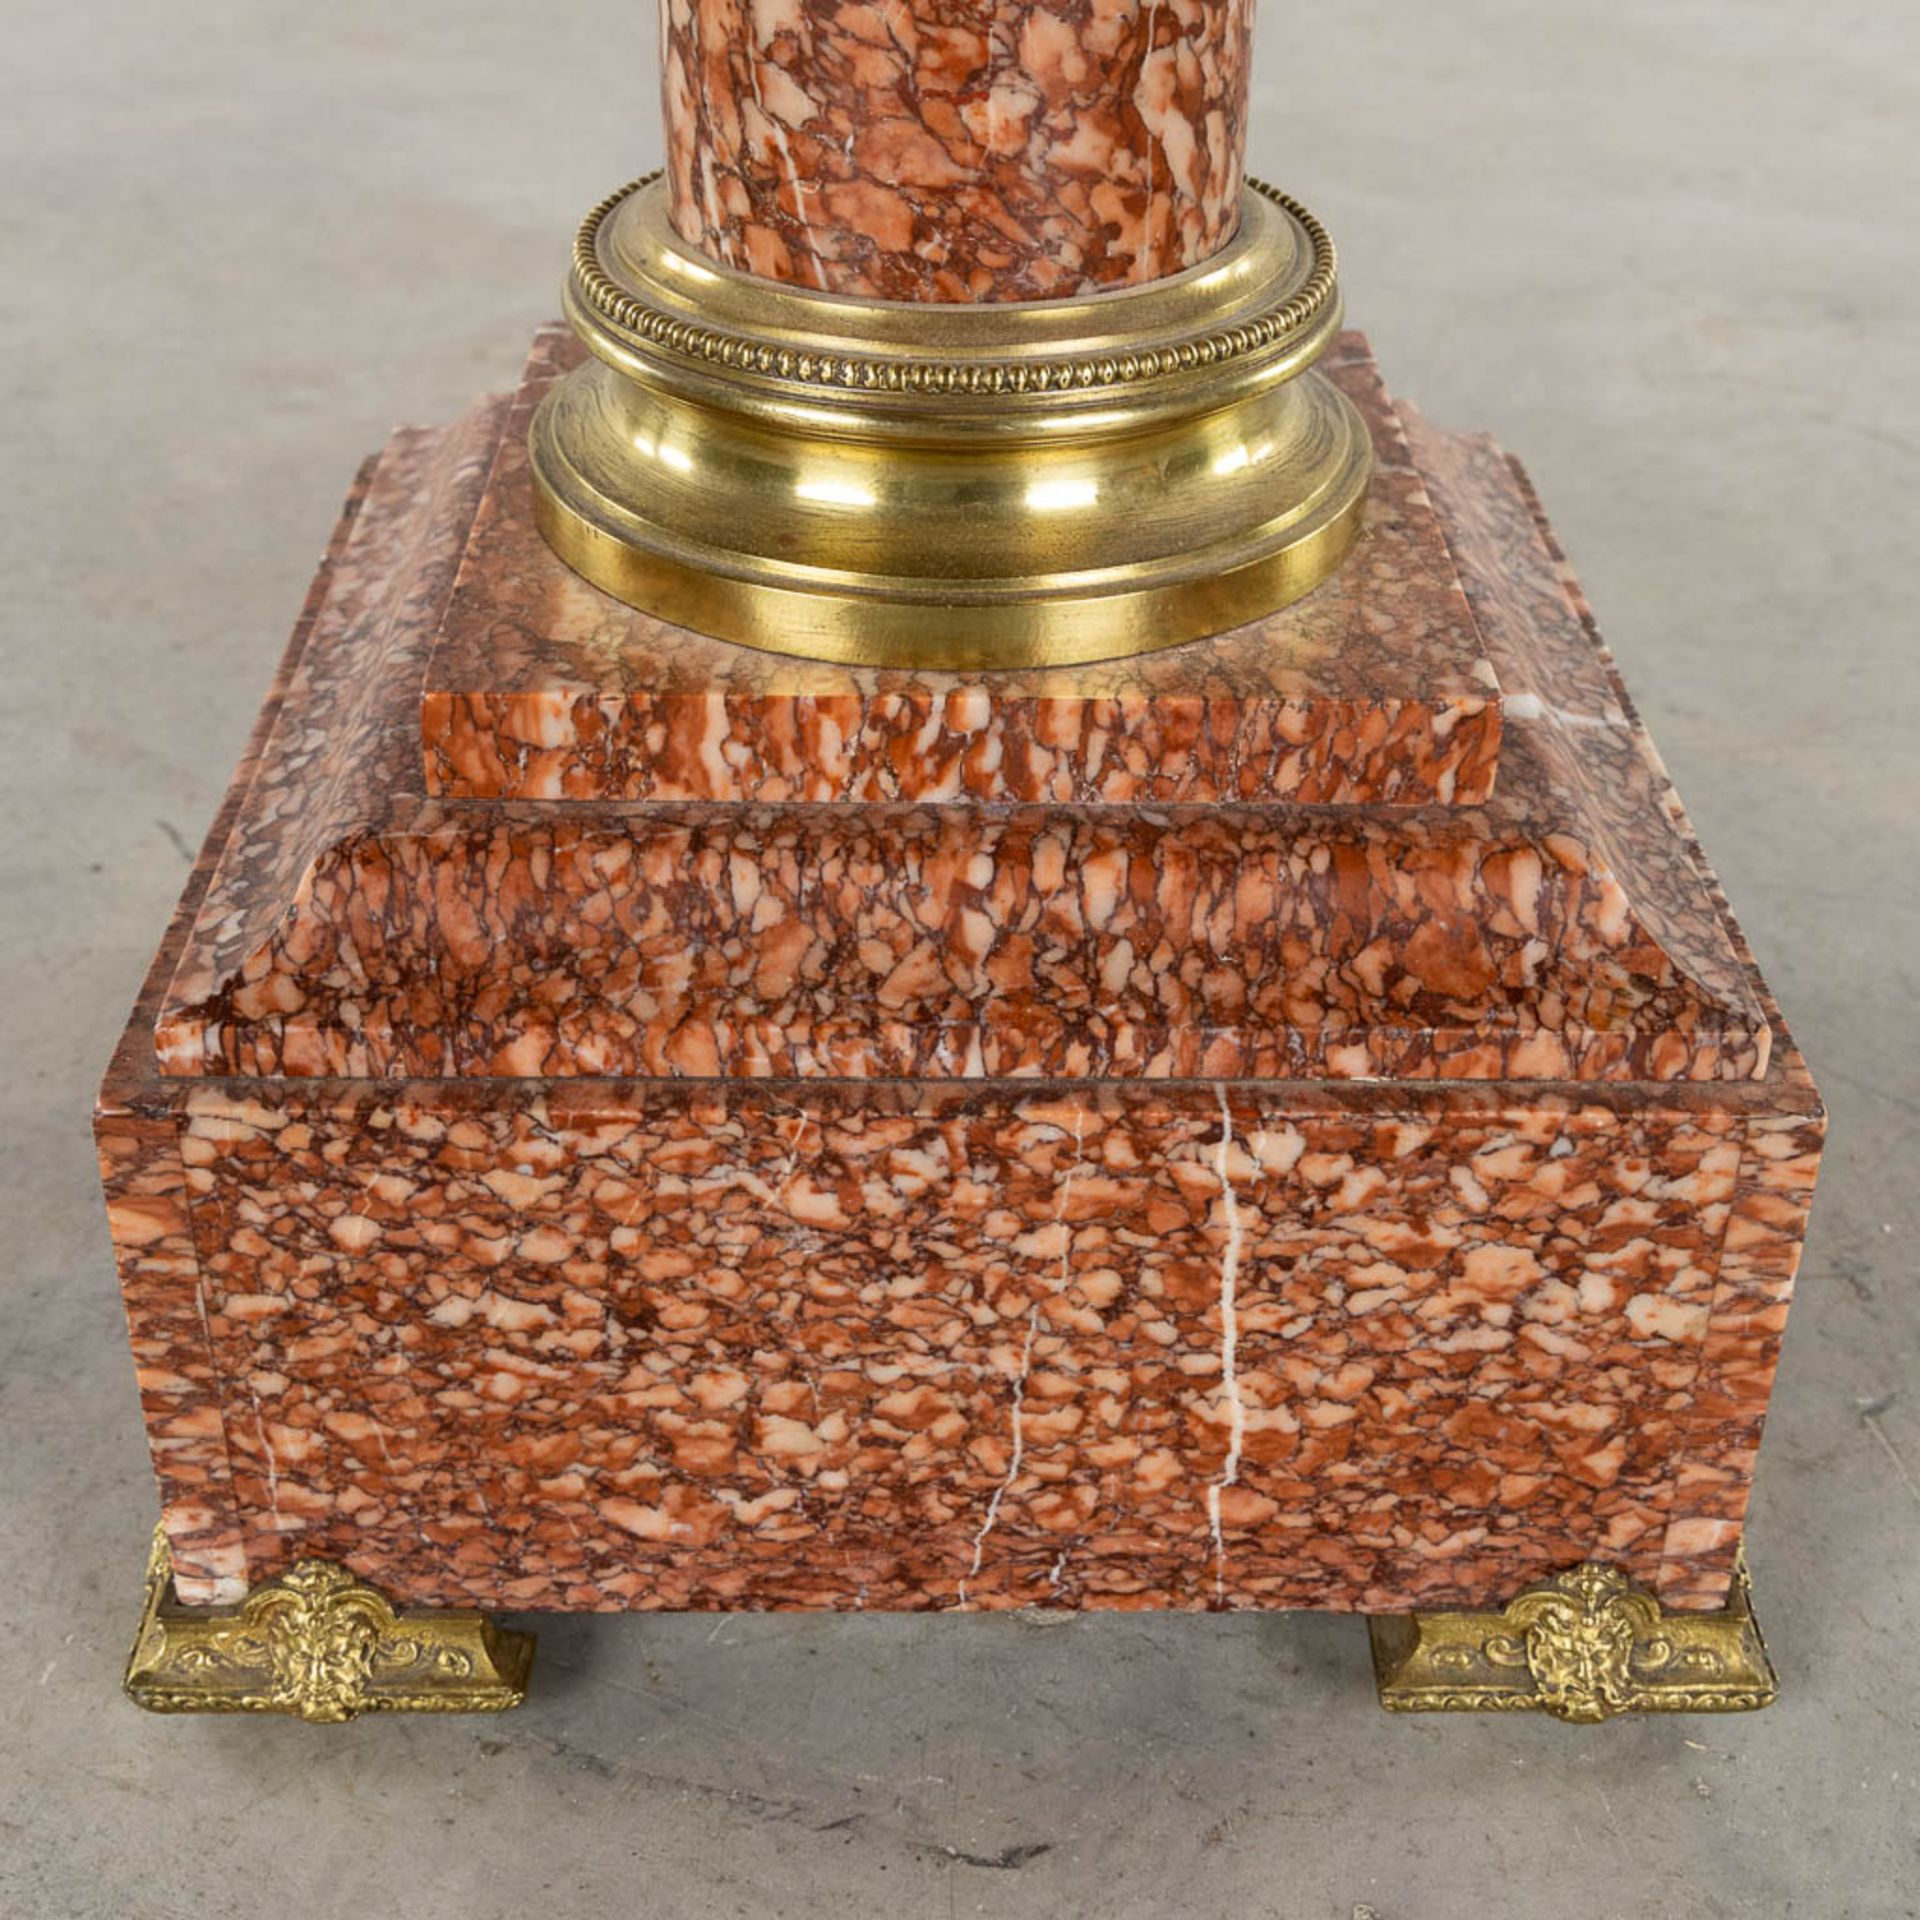 An antique sculptured red marble pedestal, mounted with bronze. Circa 1900. (L:30 x W:30 x H:103 cm) - Image 6 of 7